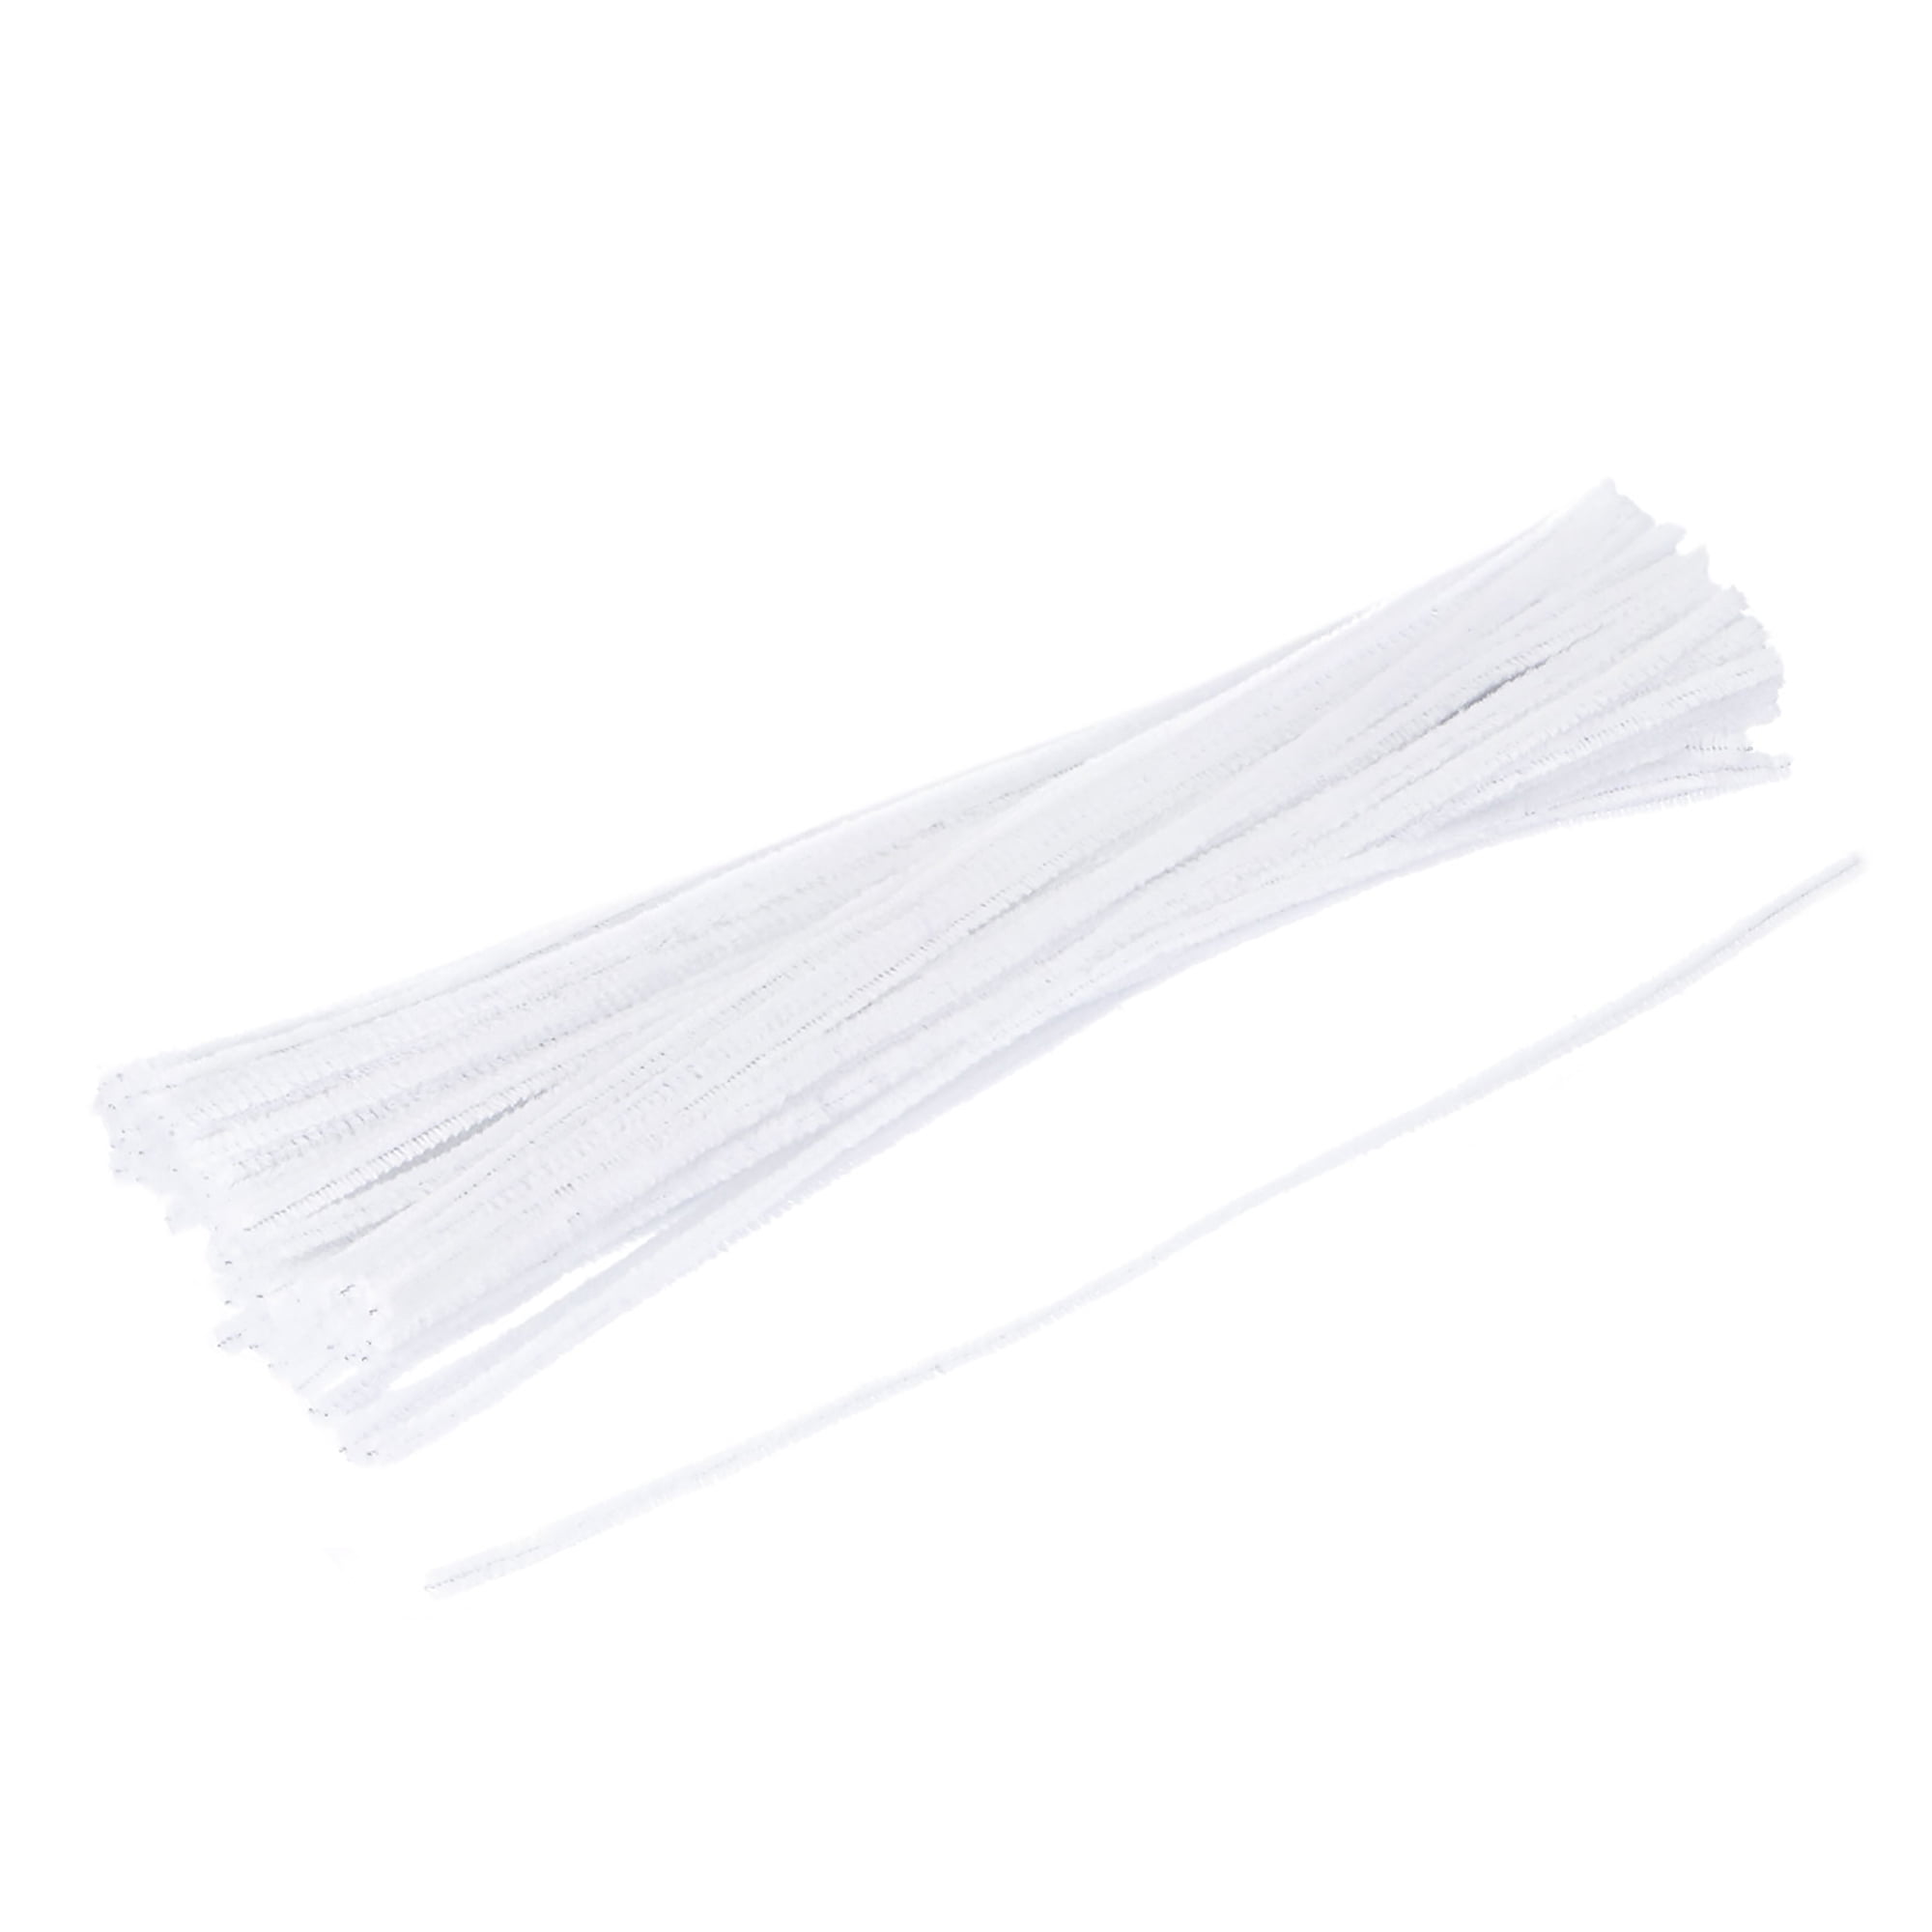 White Chenille Stems - 6mm x 12” White or Black for Doll Making Armature